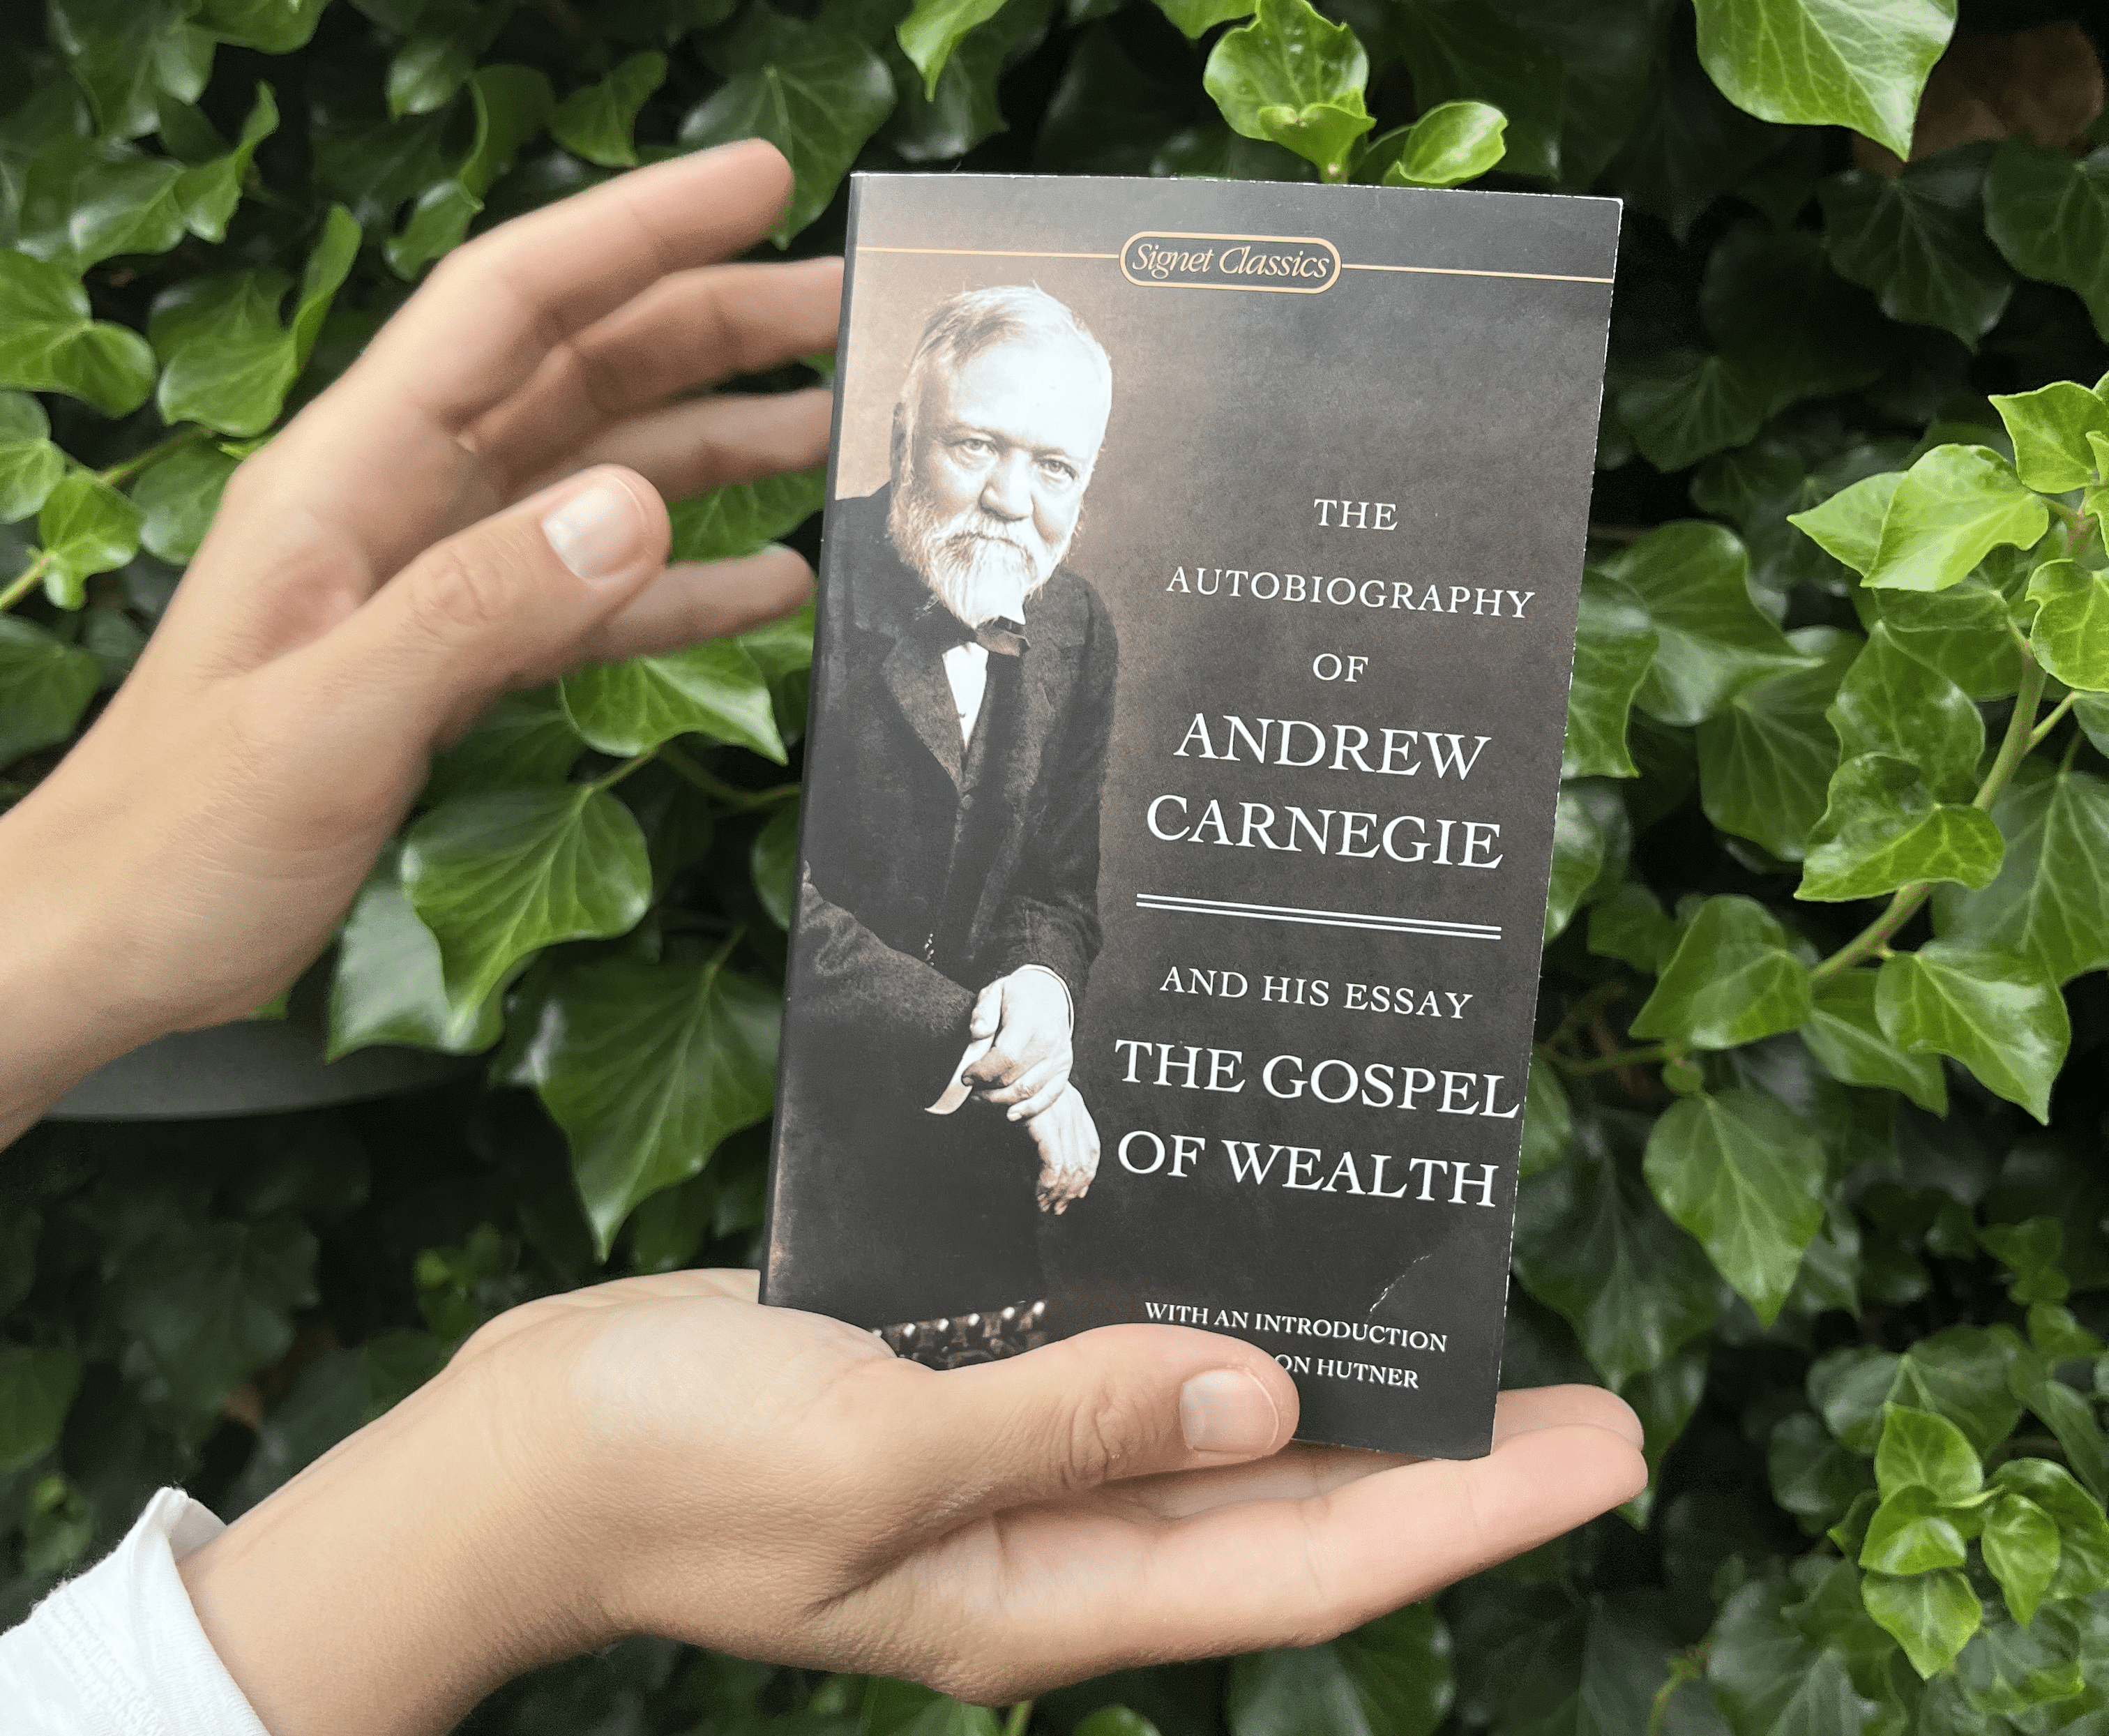 Summary: The Autobiography of Andrew Carnegie